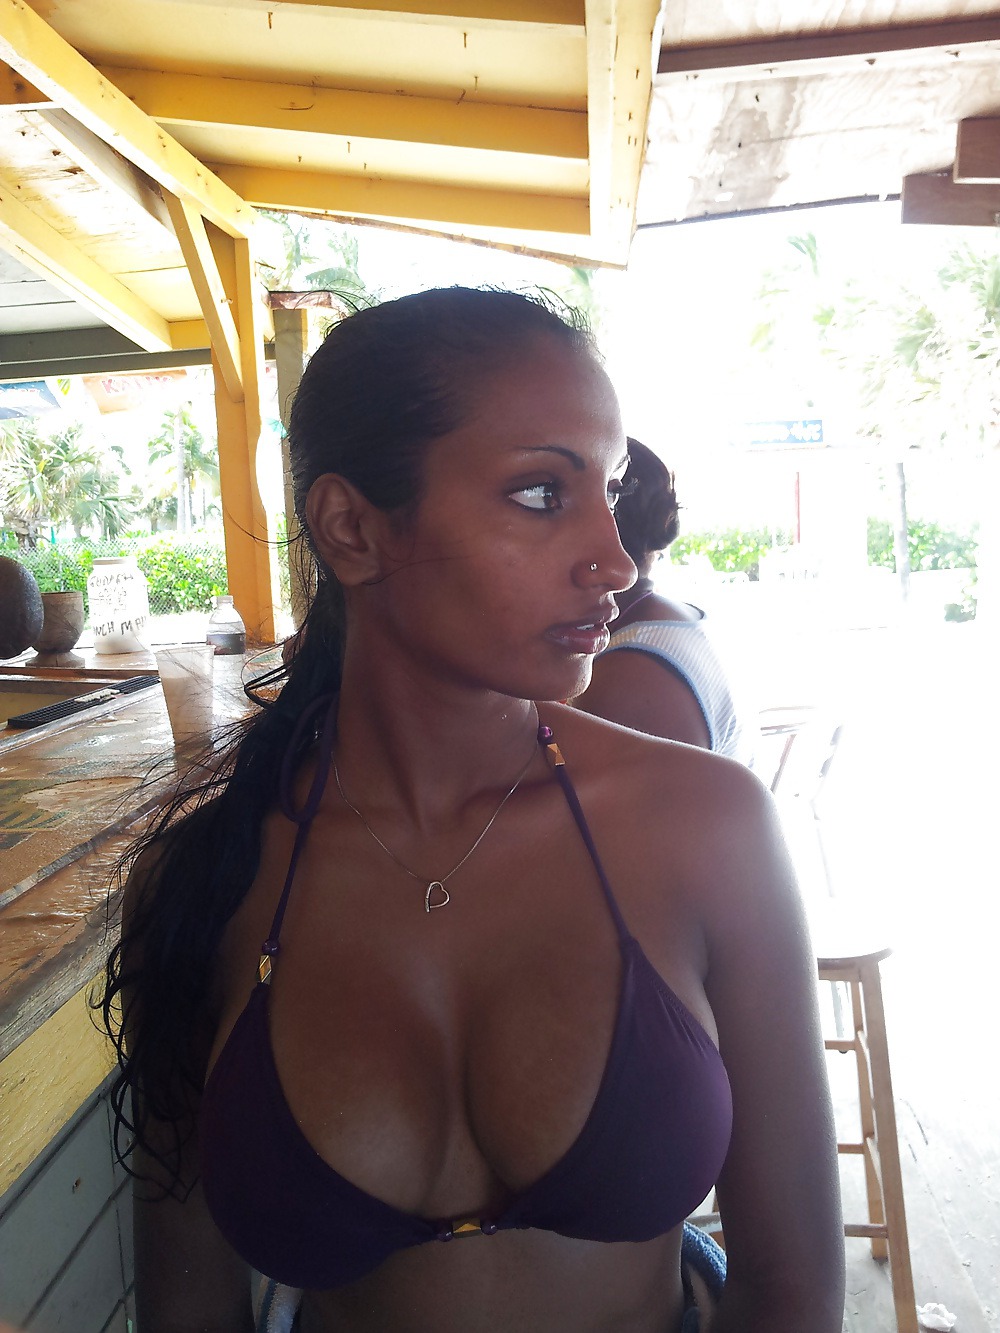 showing porn images for male chastity belt porn Babe, Darkskin, Desi, Fuckable, Hotbabe, Indian, Nipples, Perfectbabe, Perfecttits, Perkytits, Sexy, Smile, Tattoo, Tattoos, Tits, Tits, Titsntatts